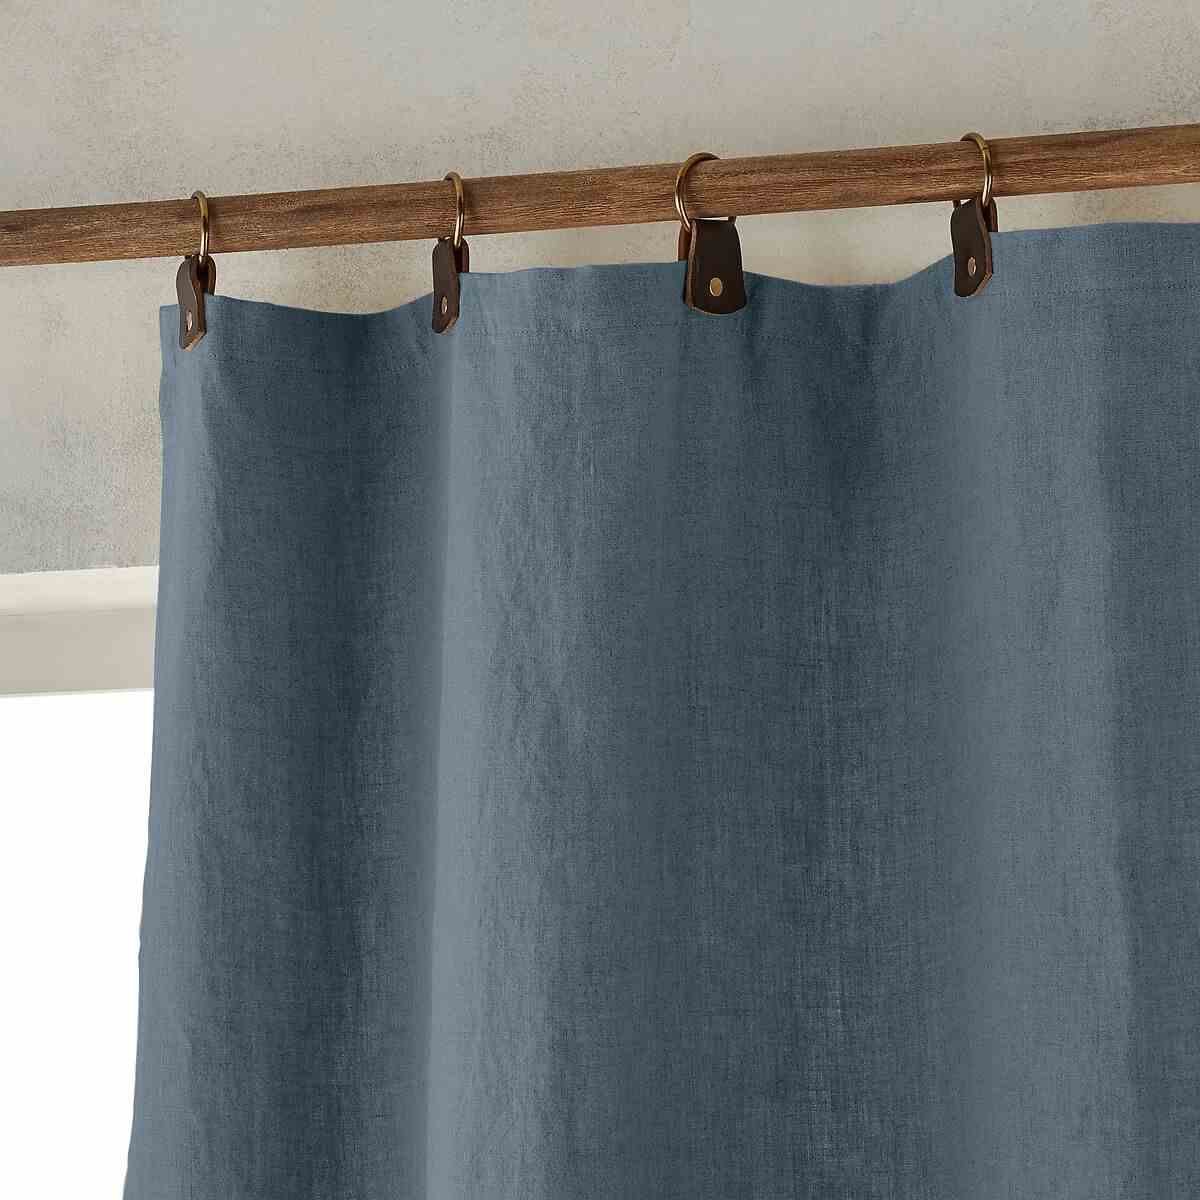 A Leather Tab Top Curtain For A Refined Industrial Style 